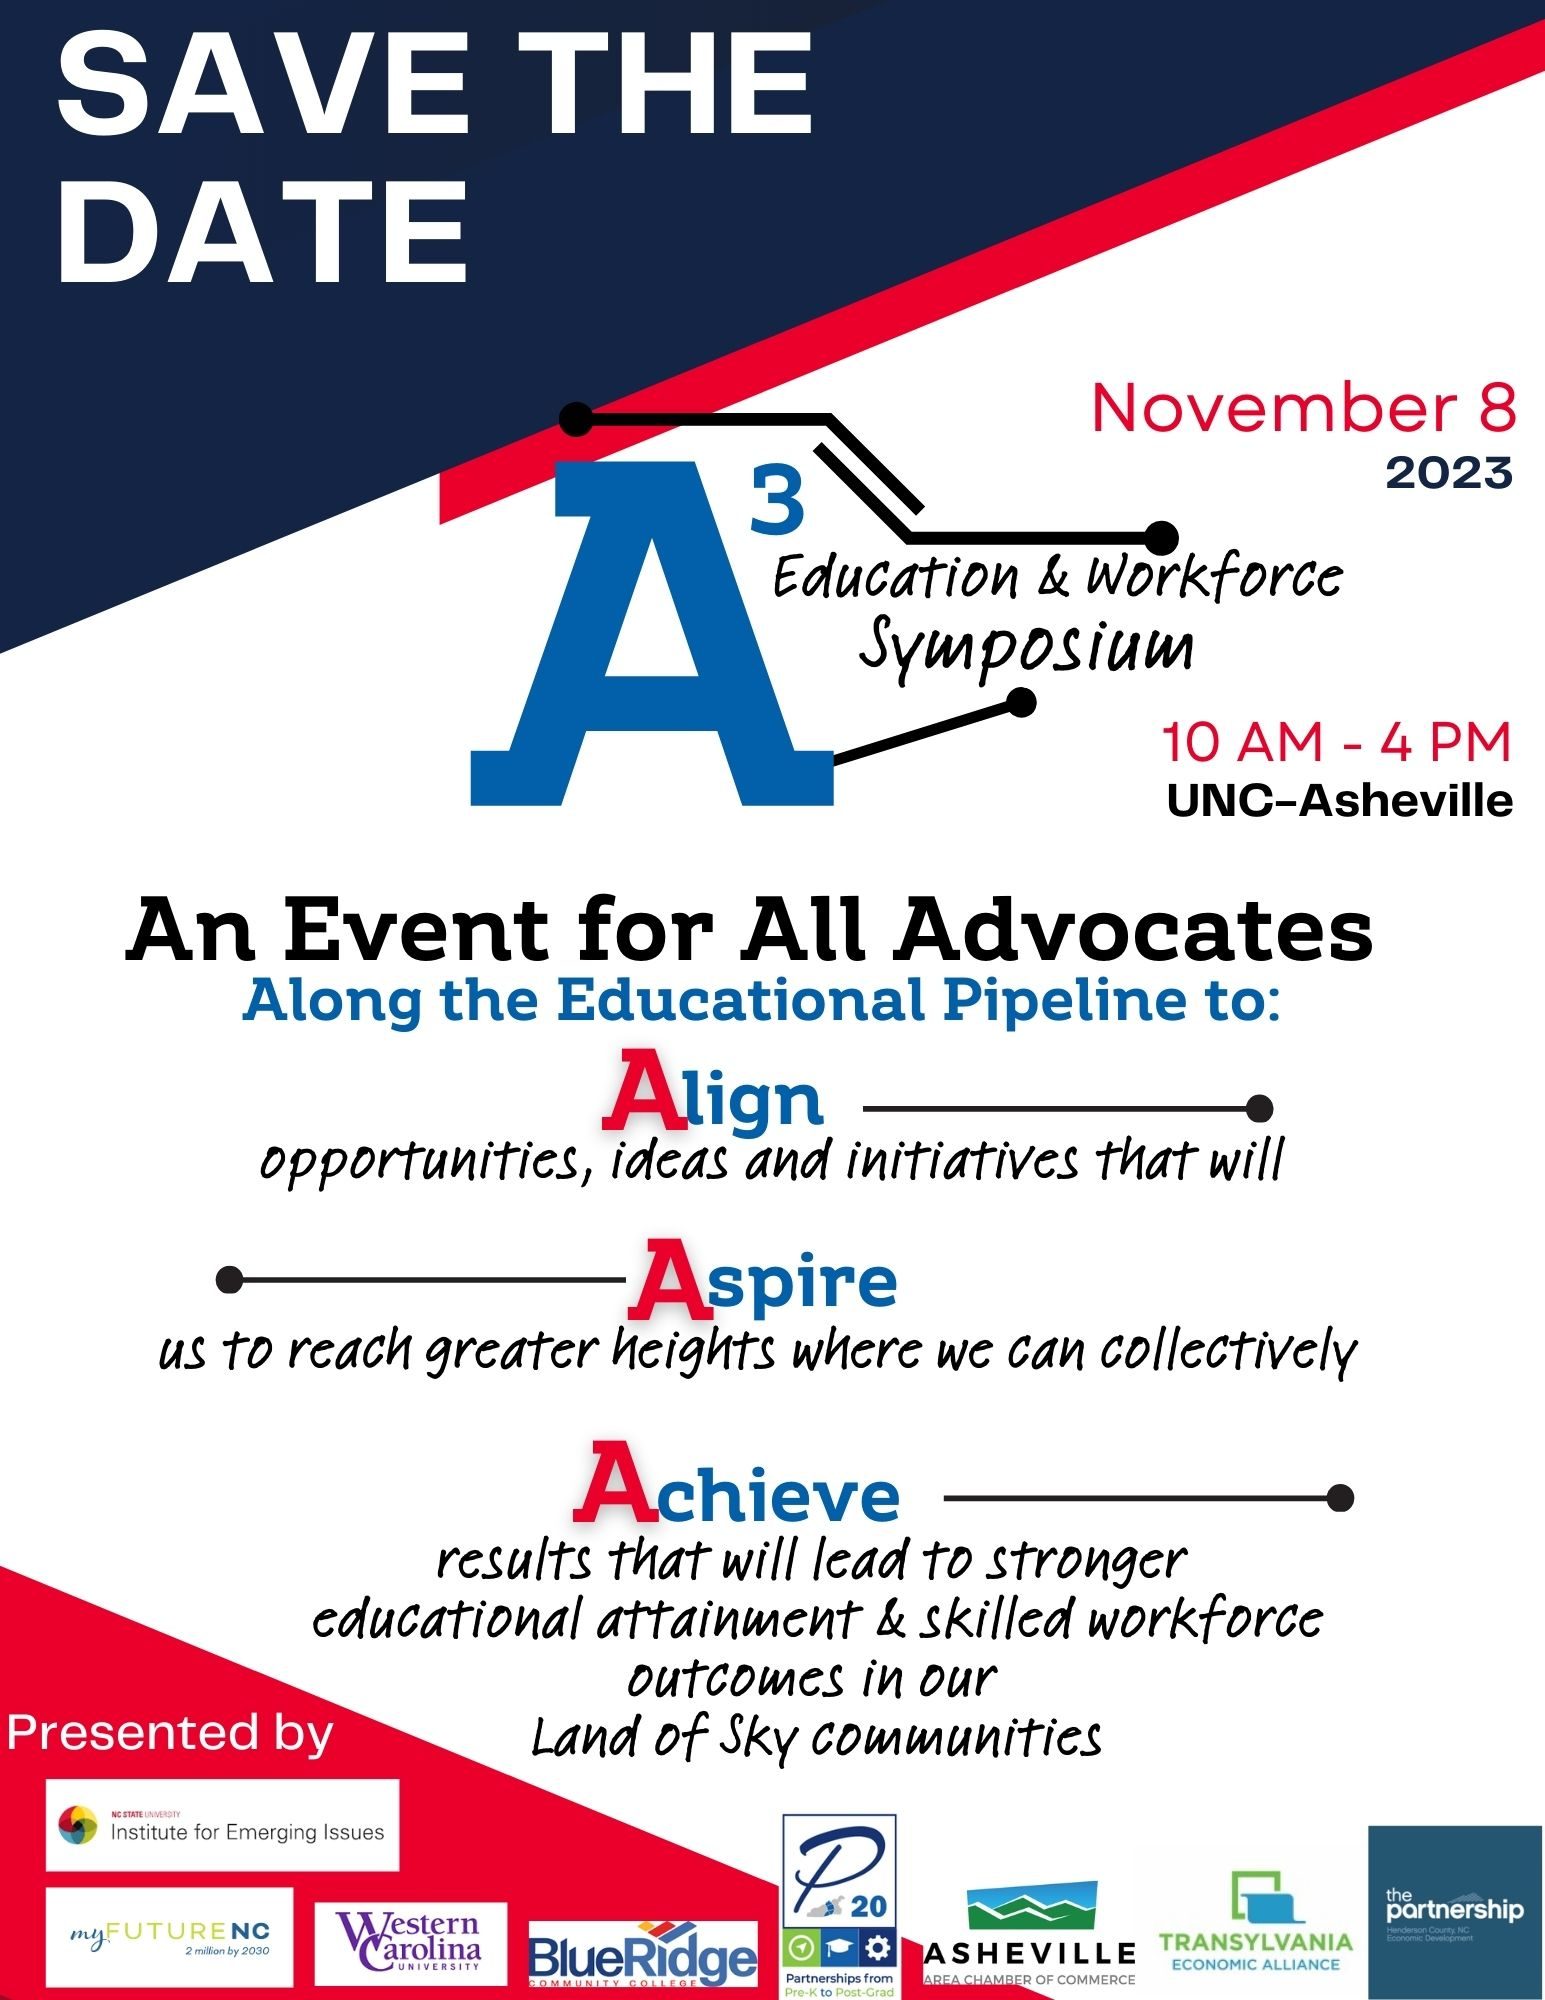 Save the Date - A3 Education & Workforce Symposium on 11/8 at UNCA